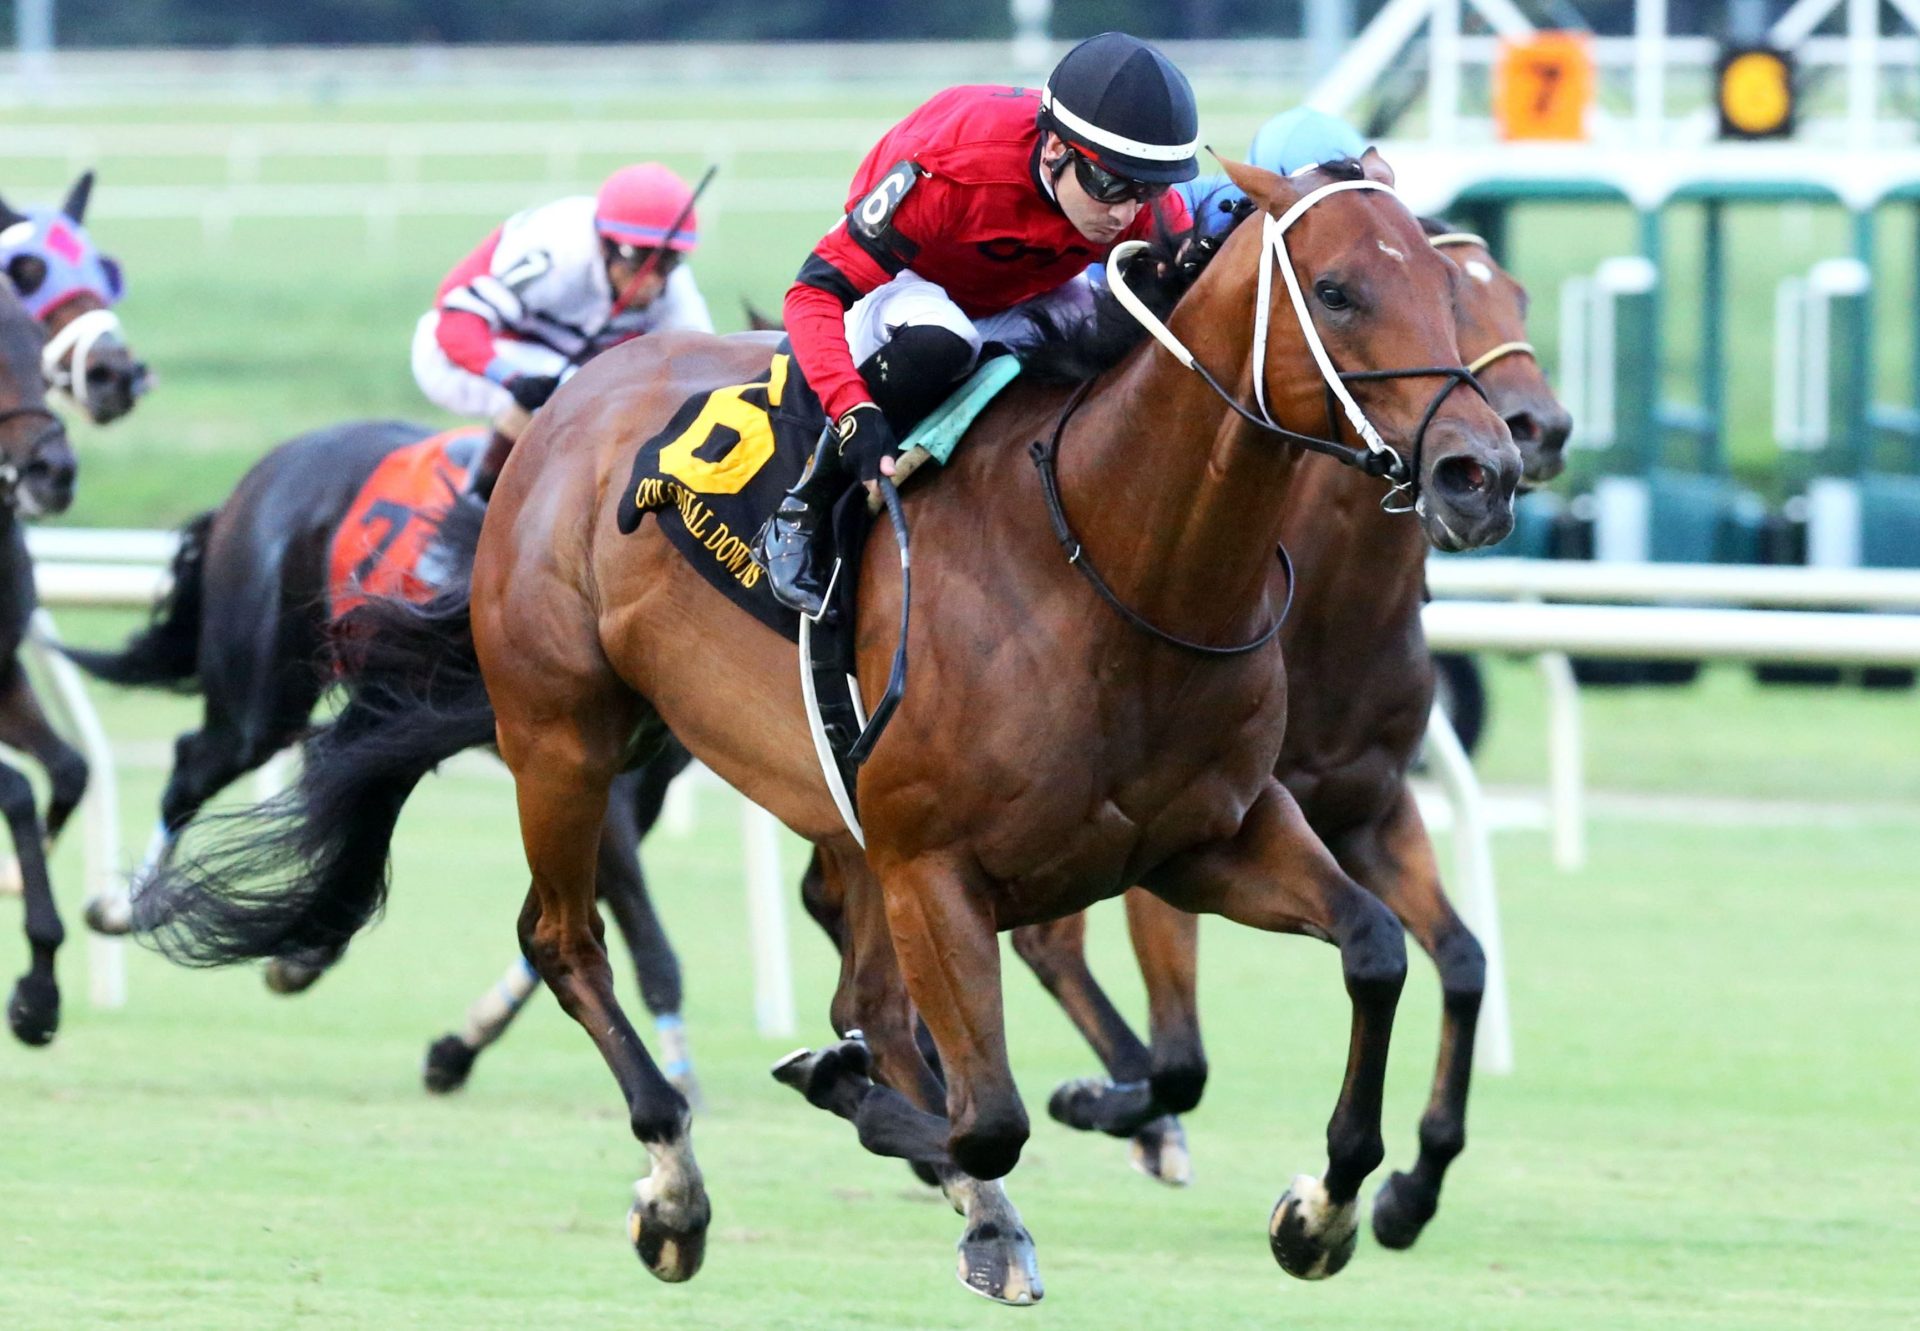 Boldor (Munnings) Wins The 2021 Punch Line Stakes at Colonial Downs